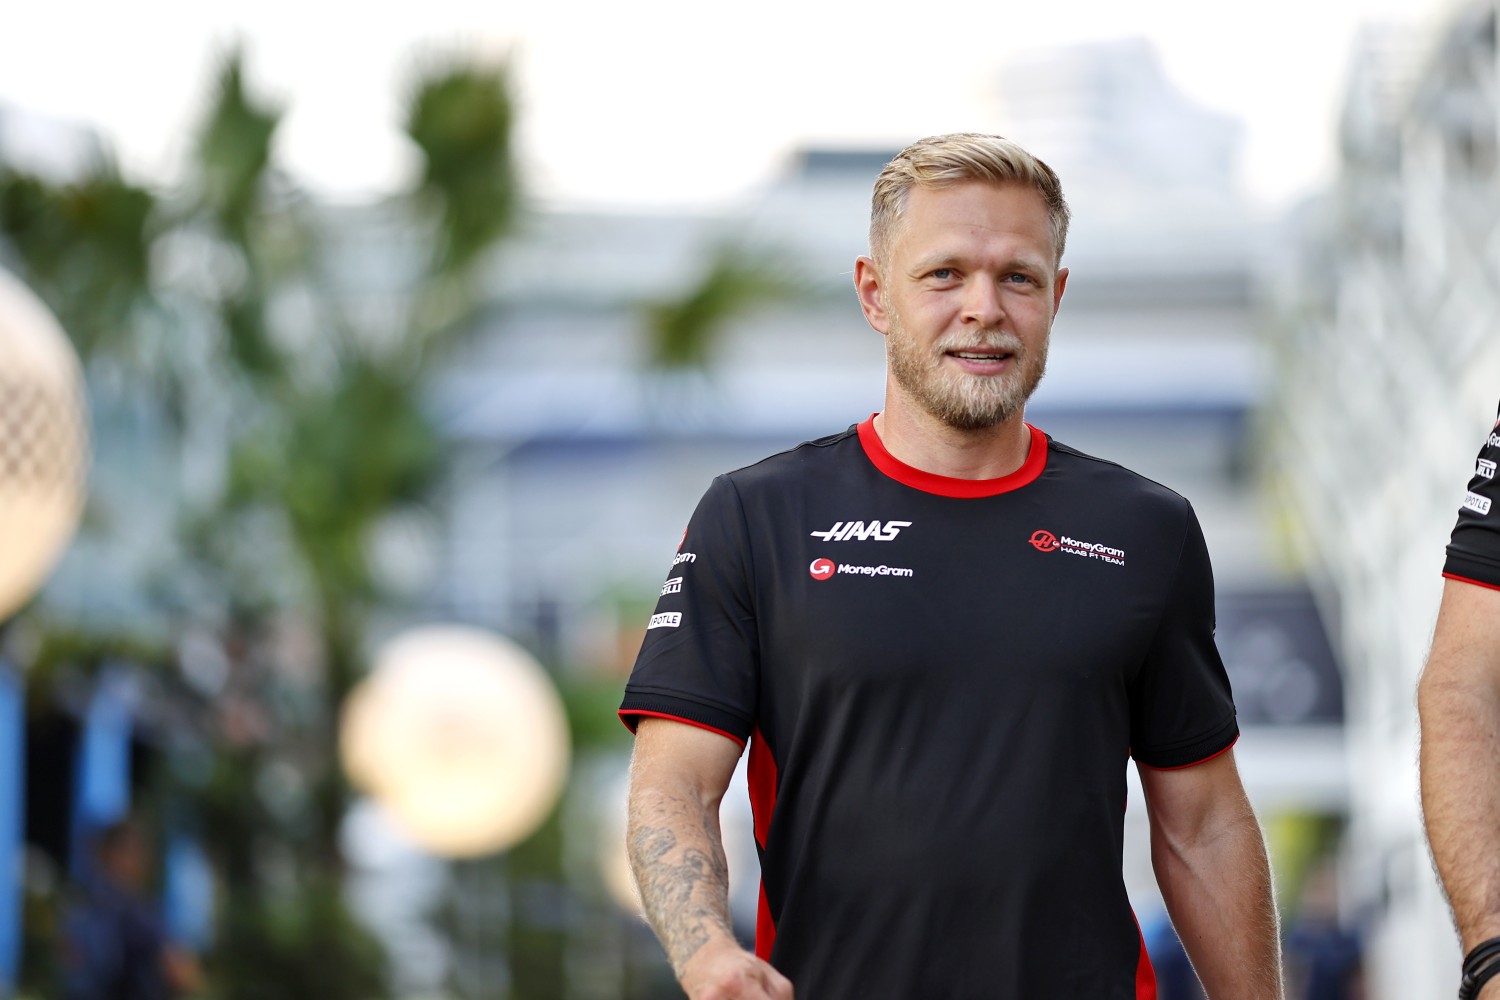 Kevin Magnussen during the Singapore GP at Marina Bay Street Circuit on Thursday September 14, 2023 in Singapore, Singapore. (Photo by Andy Hone / LAT Images)